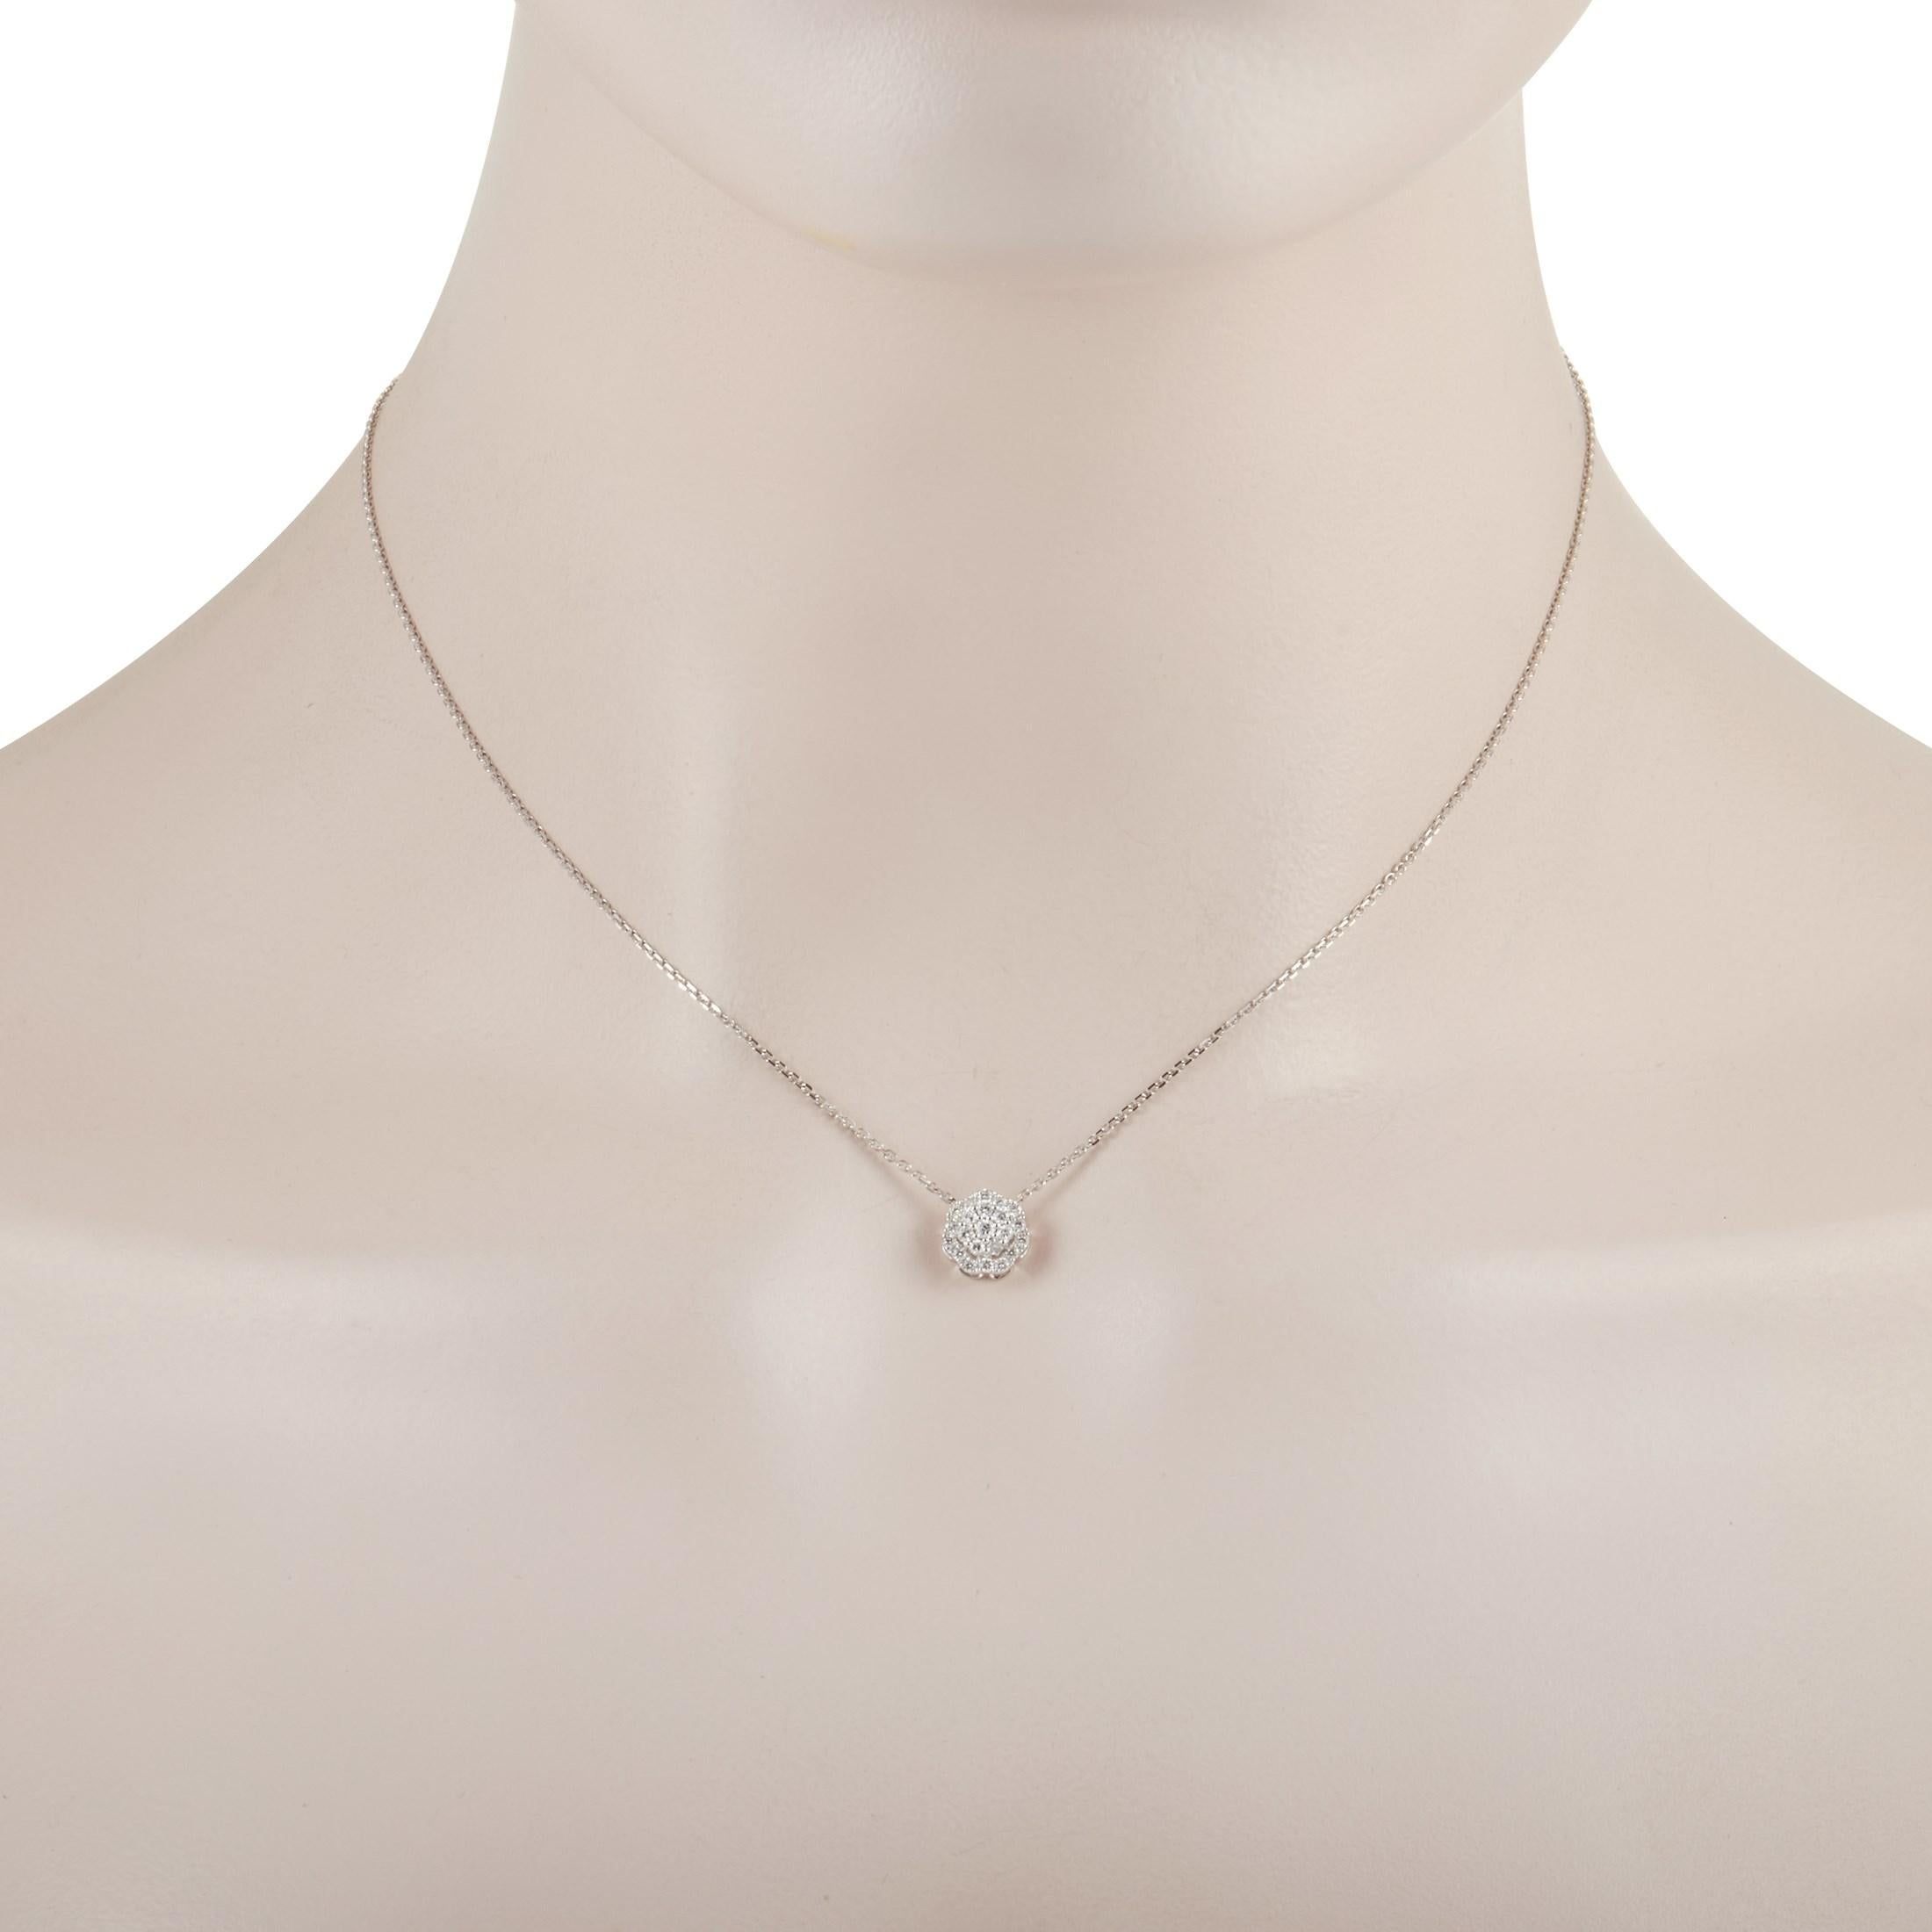 This dainty diamond pendant necklace is the perfect size for everyday wear. Crafted from 18K White Gold, it features a .25” round floral pendant suspended from a 15” chain. Glittering diamonds with a total weight of 0.27 carats add sparkle and